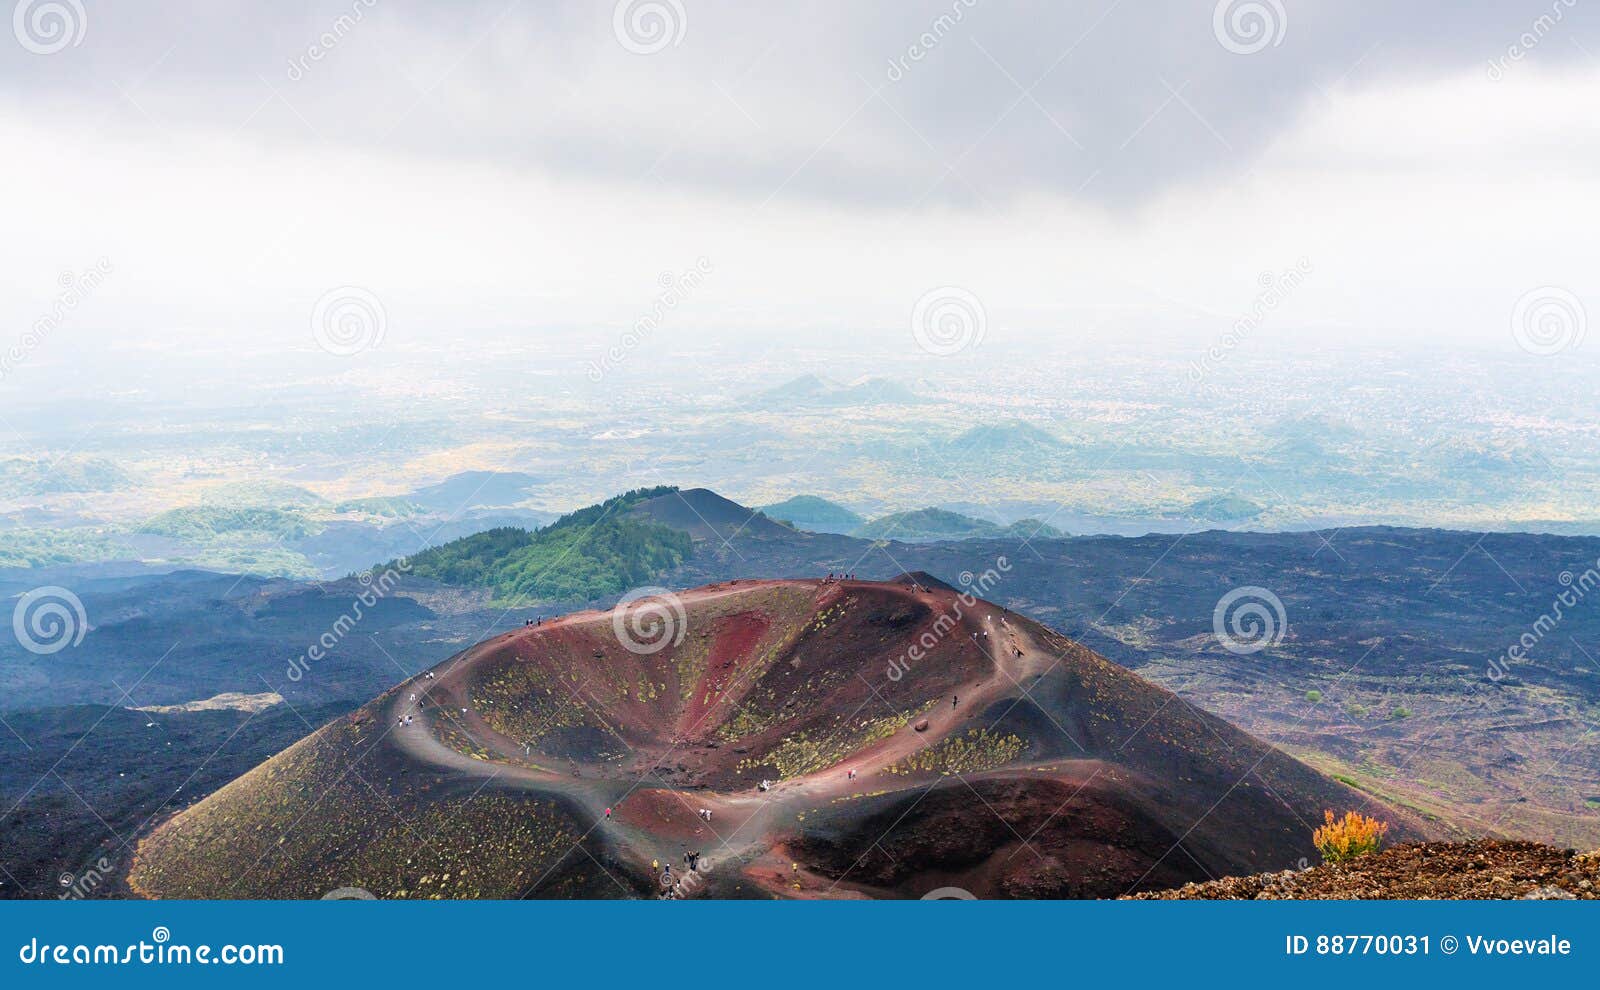 above view of monti silvestri of mount etna